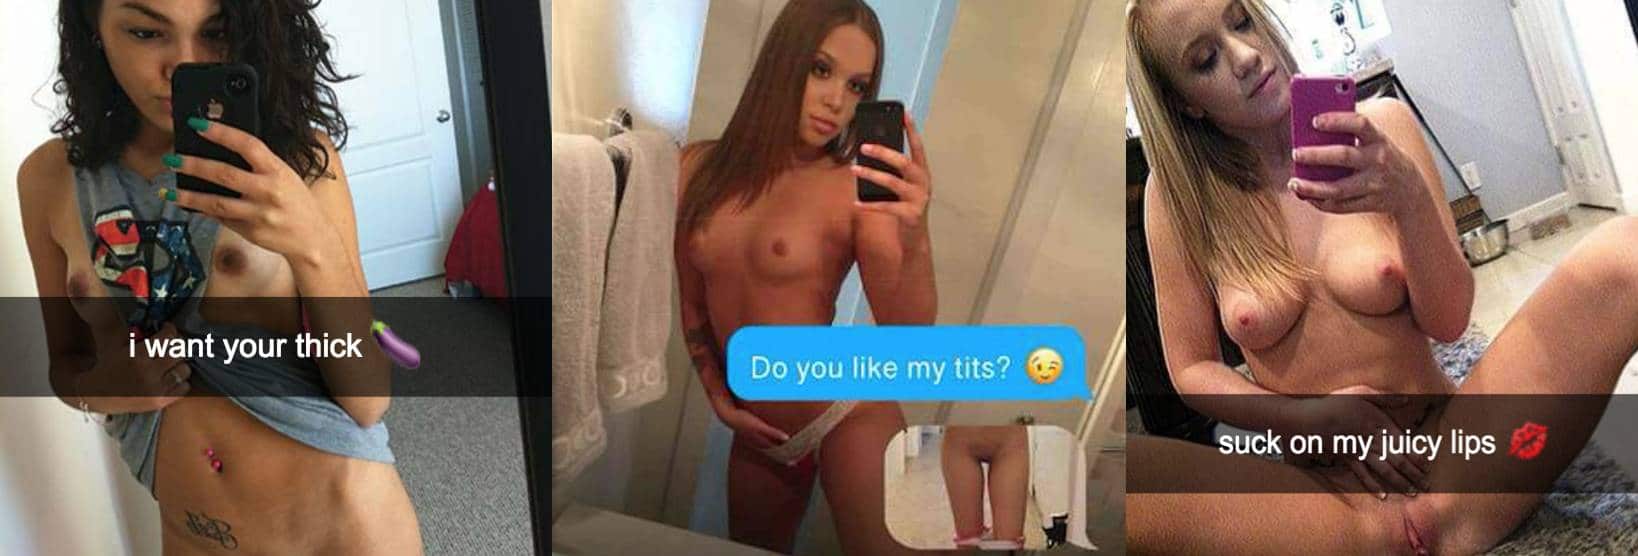 Massive Tits Sexting - Top 10 Sexting Online Websites & Apps For Horny Singles